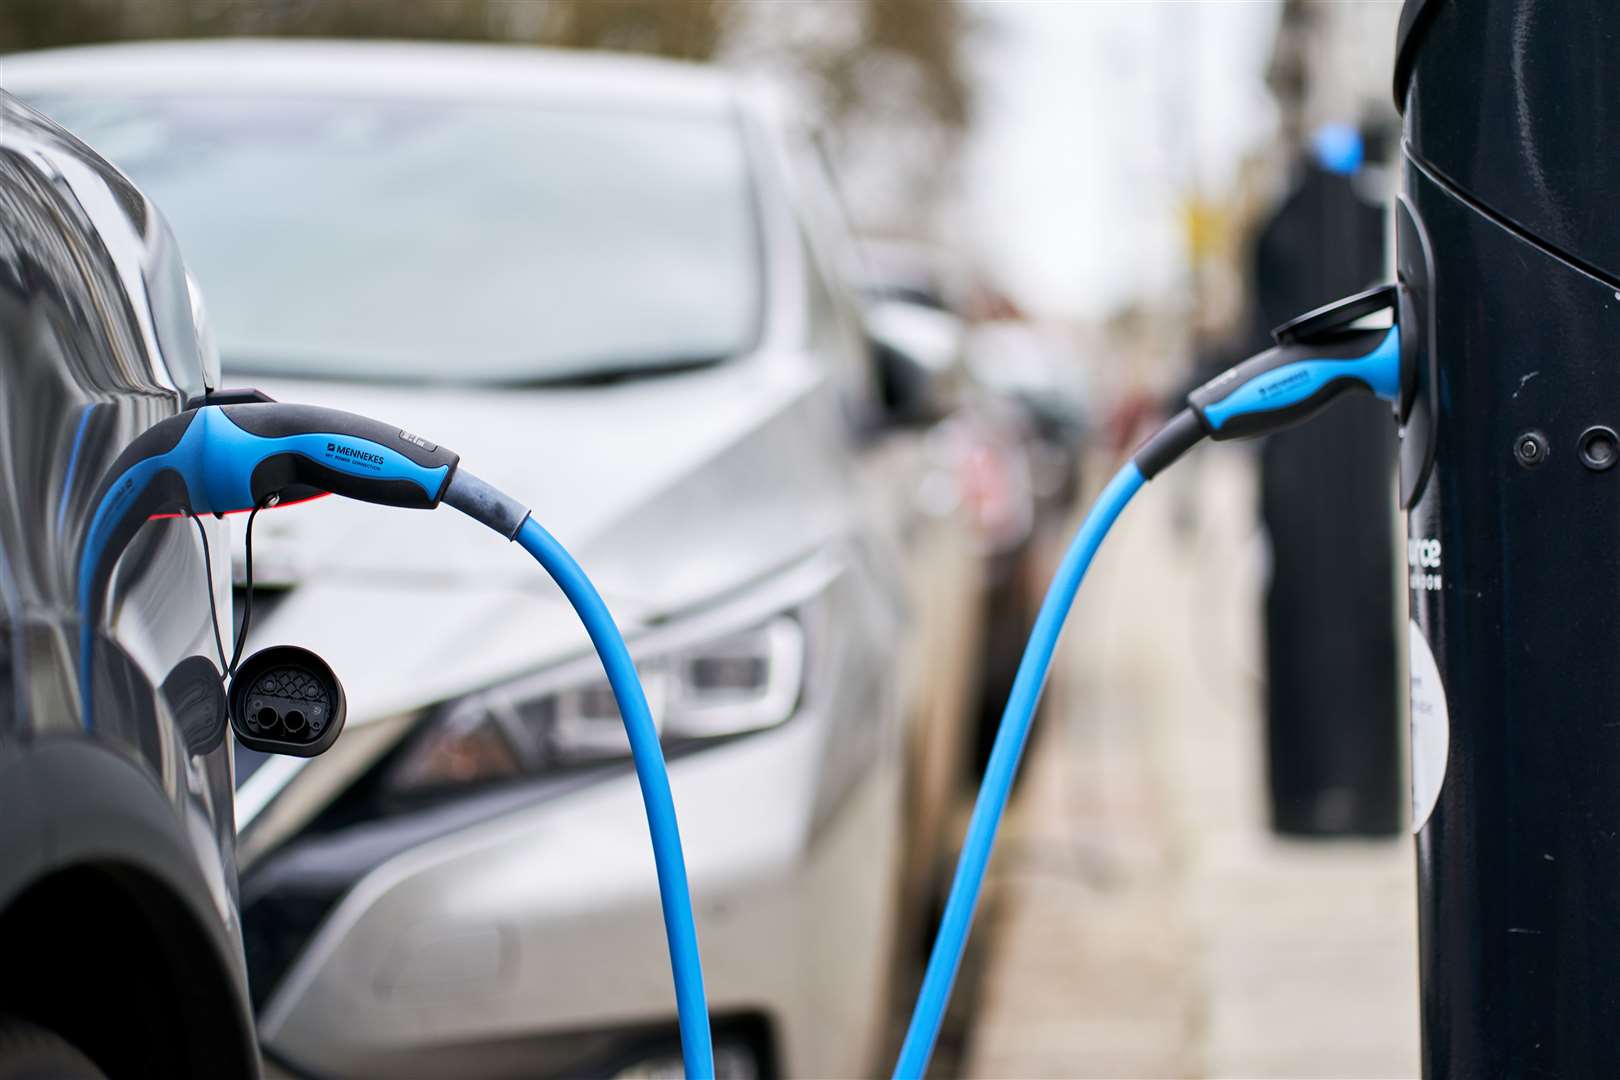 While drivers increasingly purchasing EV cars, some industries may also have to electrify their options